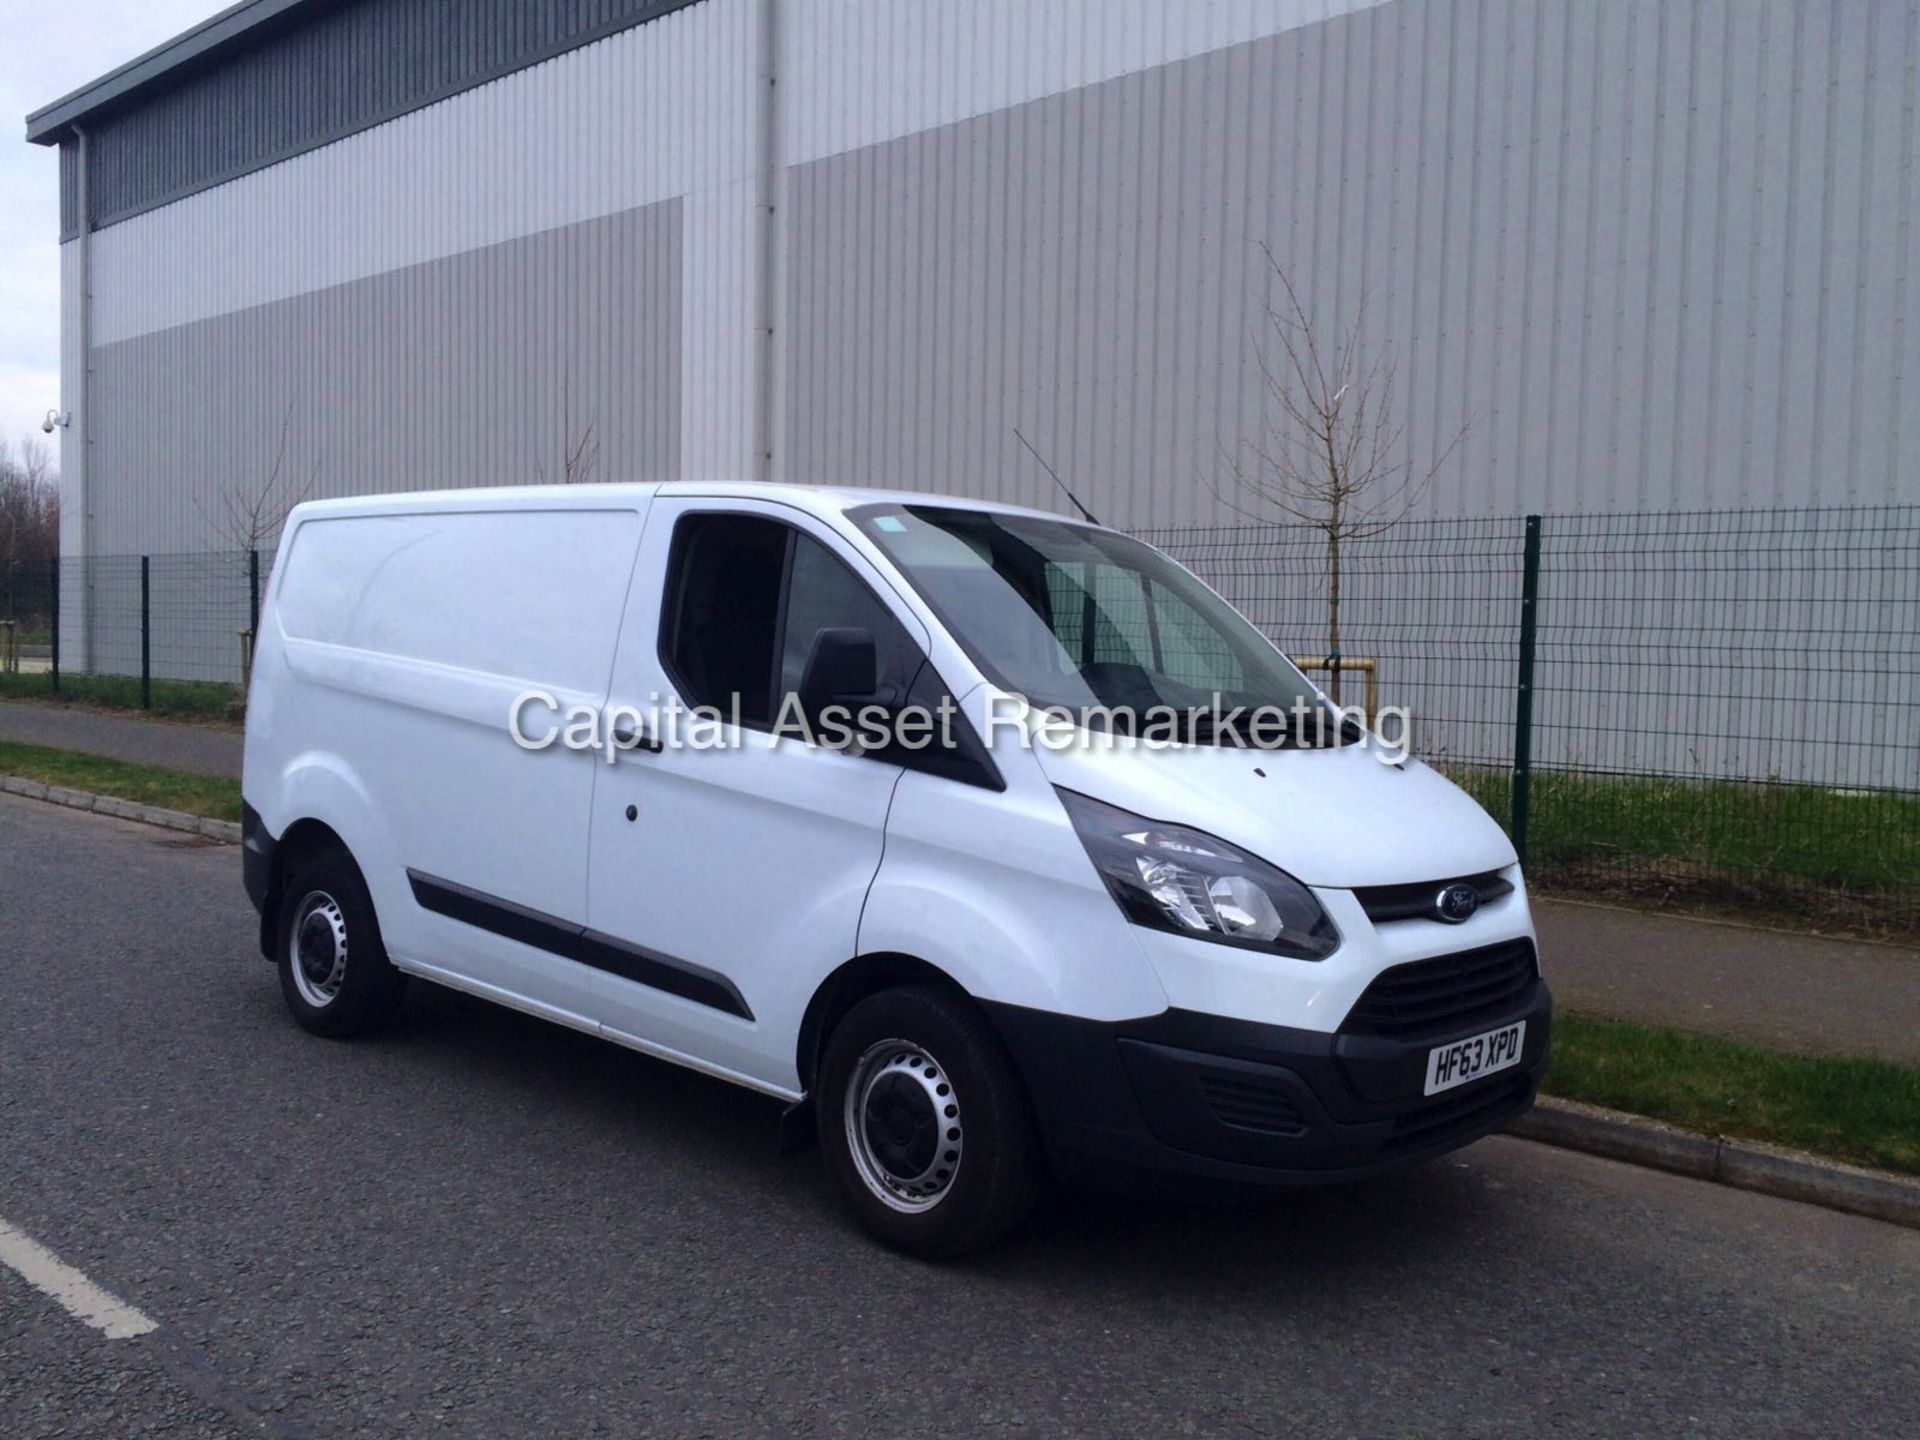 FORD TRANSIT CUSTOM 290 'ECO TECH' (2014 MODEL) 1 OWNER FROM NEW - FULL SERVICE HISTORY - NEW SHAPE